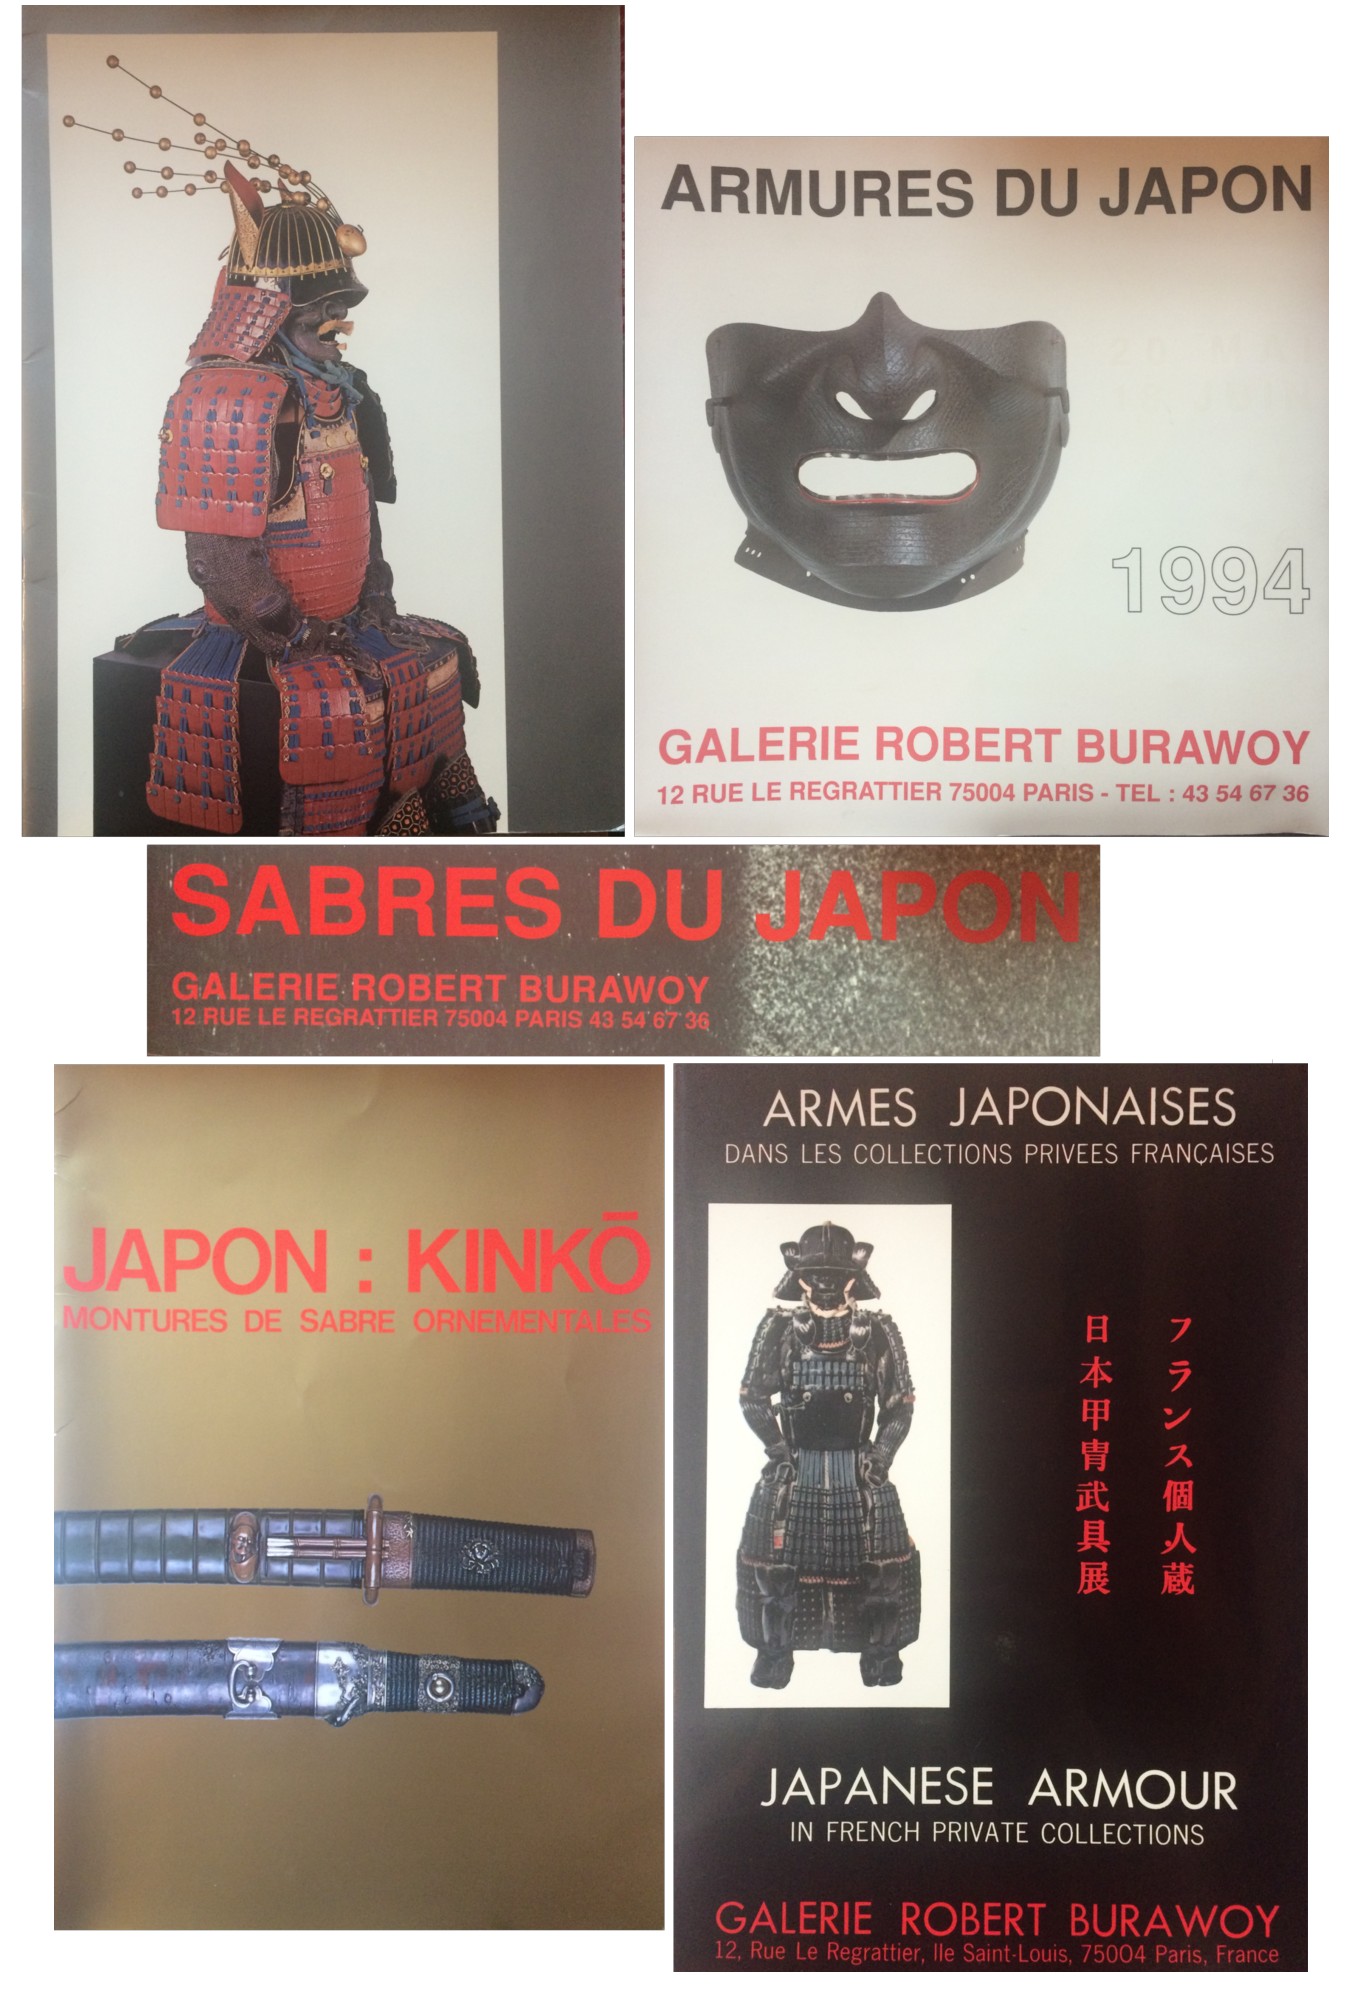 Burawoy, Robert - A GROUP OF FIVE CATALOGUES OF JAPANESE ARMS, ARMOR, AND SWORDS (INCLUDING ARMES JAPONAISES DANS LES COLLECTIONS PRIVEES FRANCAISES / JAPANESE ARMOUR IN FRENCH PRIVATE COLLECTIONS) ISSUED BY GALERIE ROBERT BURAWOY